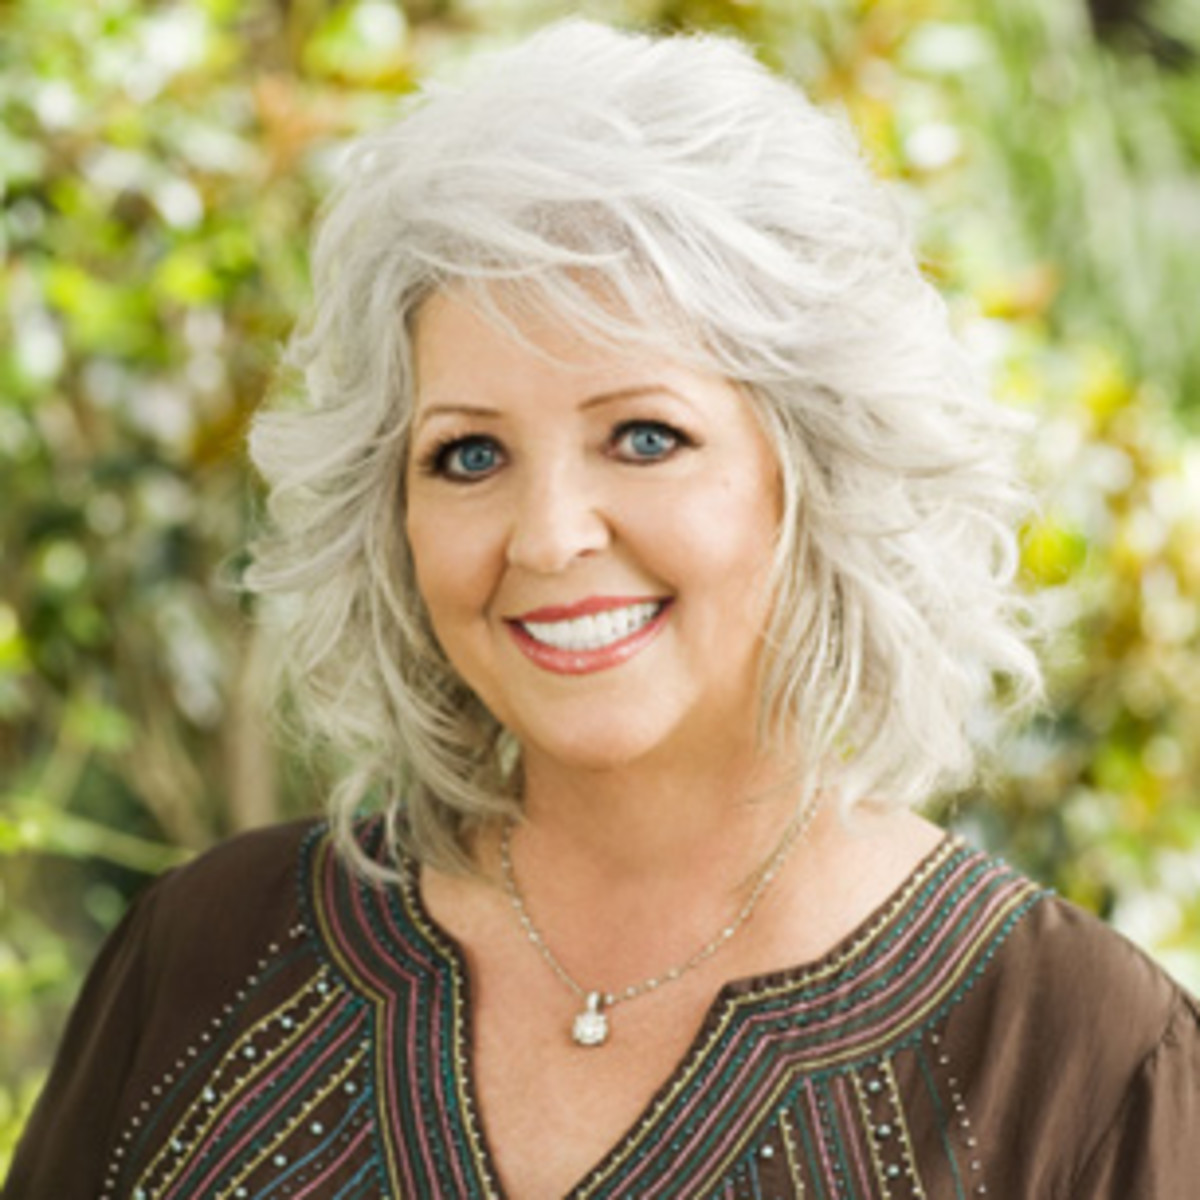 What Did Paula Deen Look Like When She Was Young?